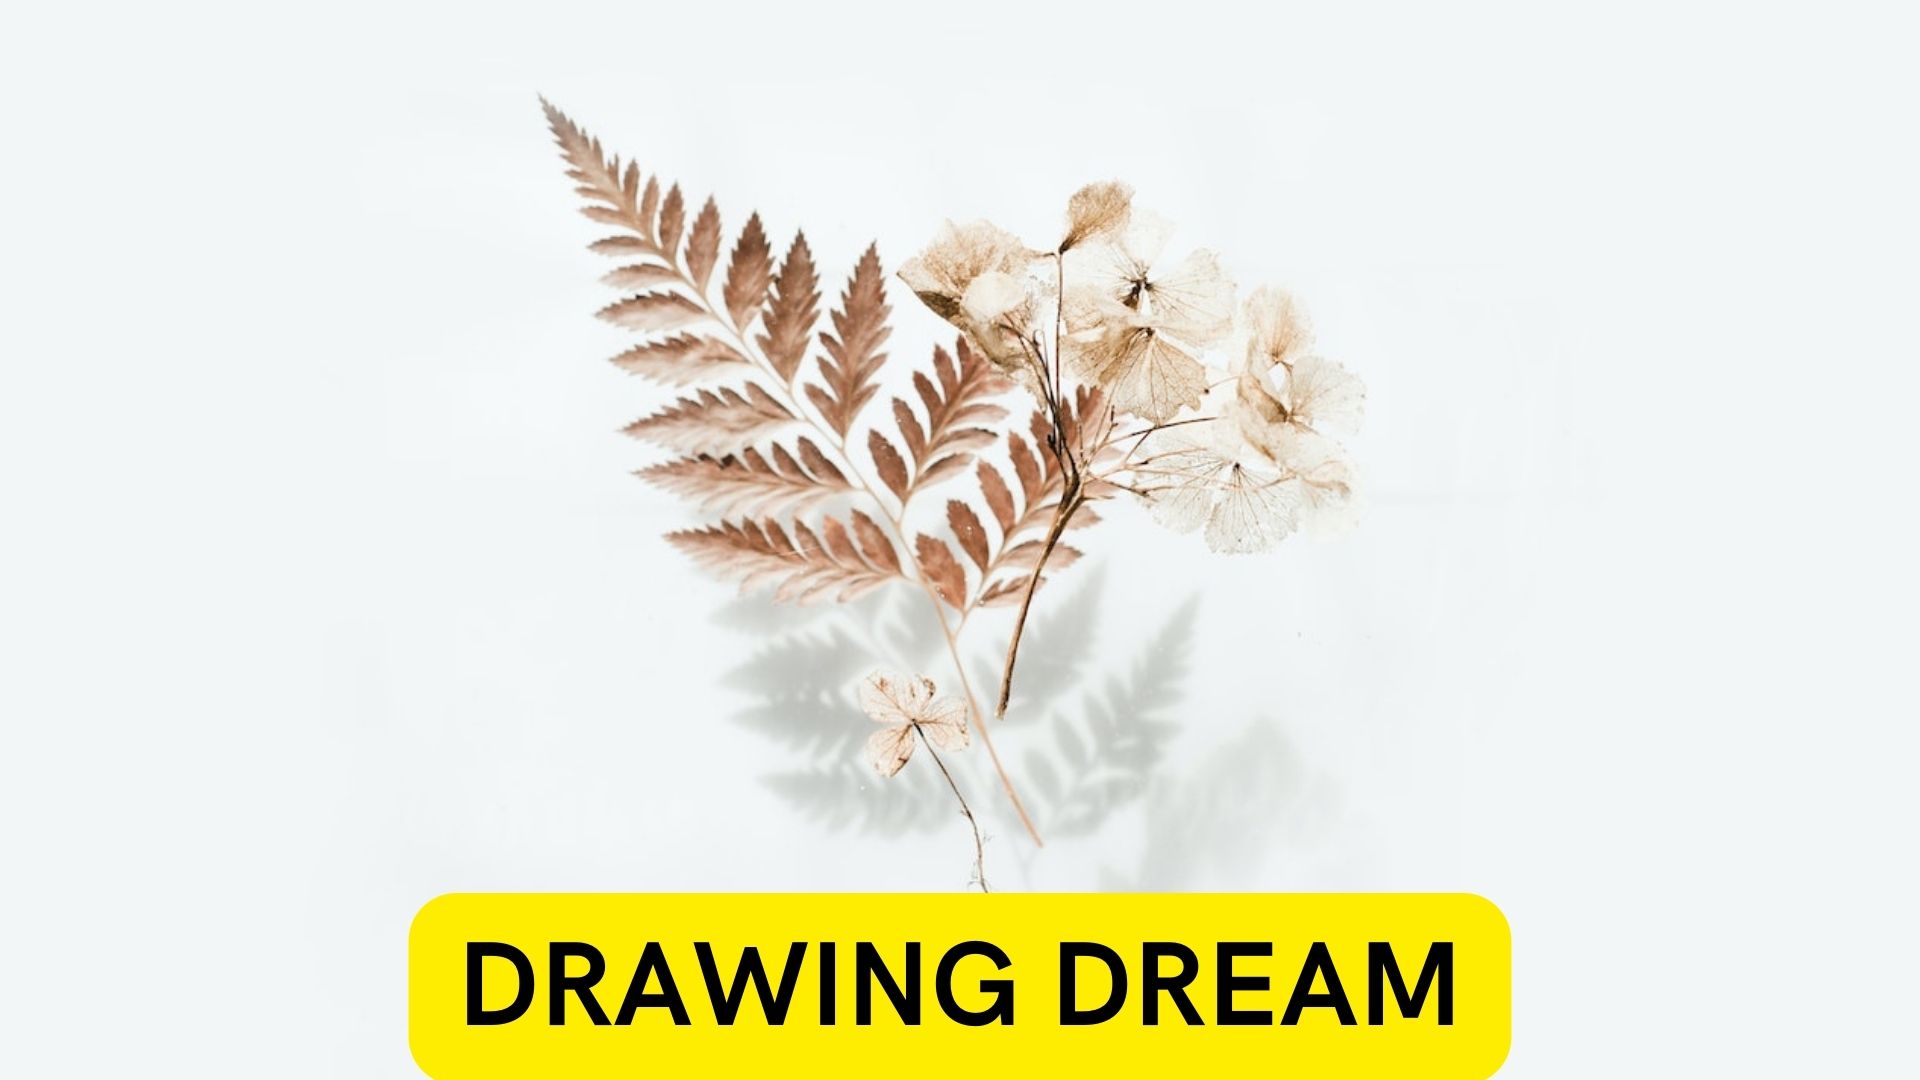 Drawing Dream - Meaning And Symbolism